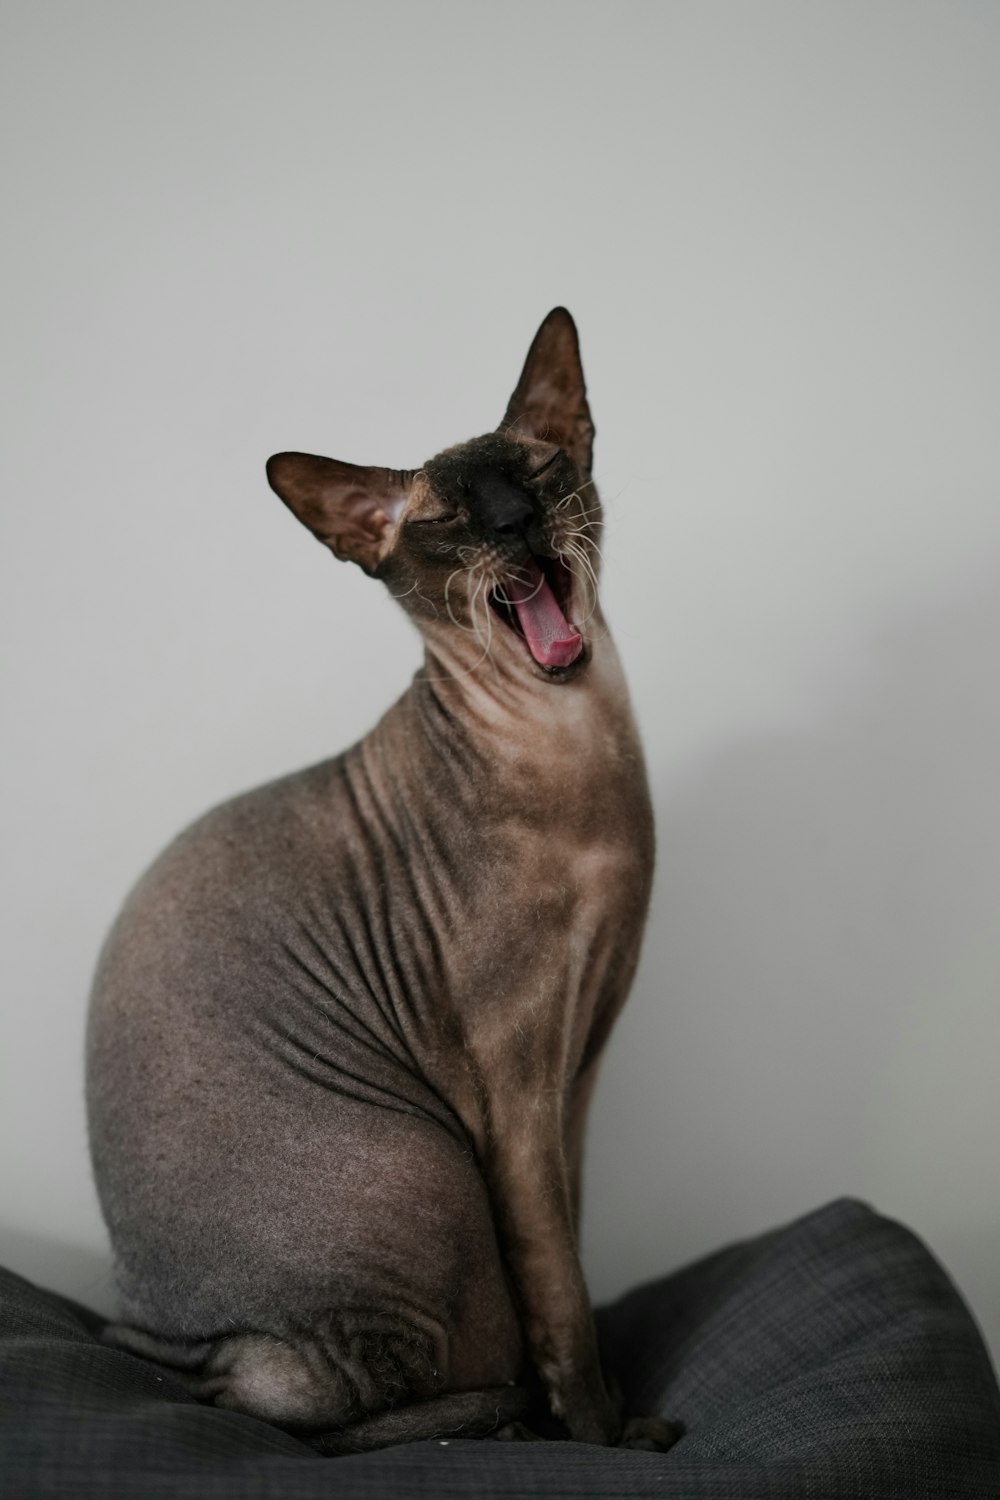 a hairless cat yawns while sitting on a pillow